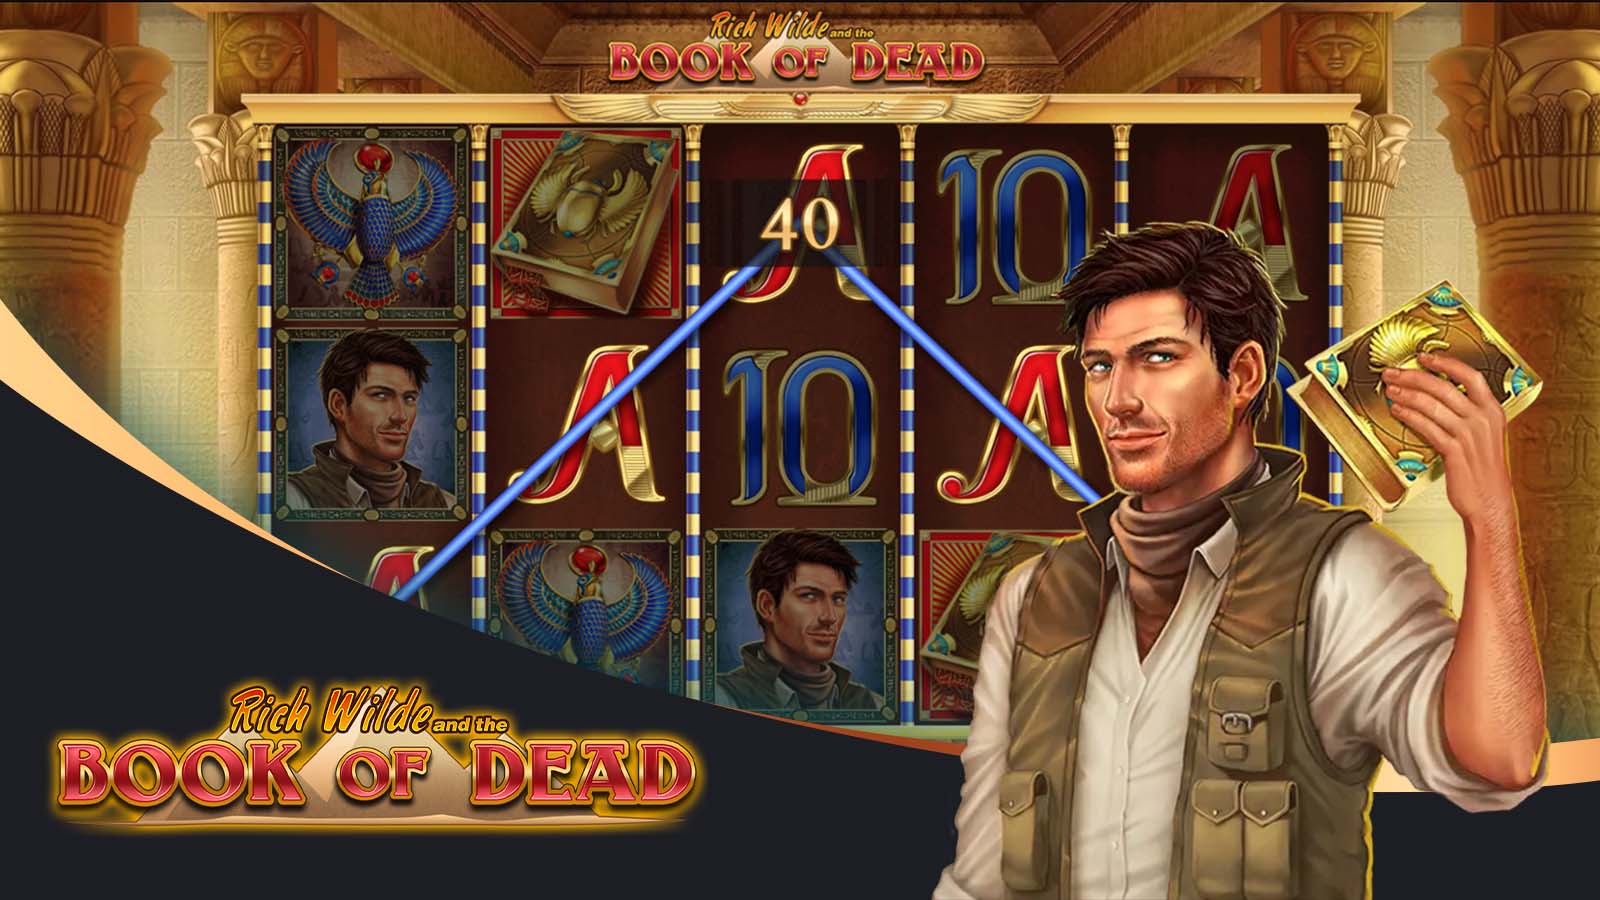 How to Play the Book of Dead Slot Game